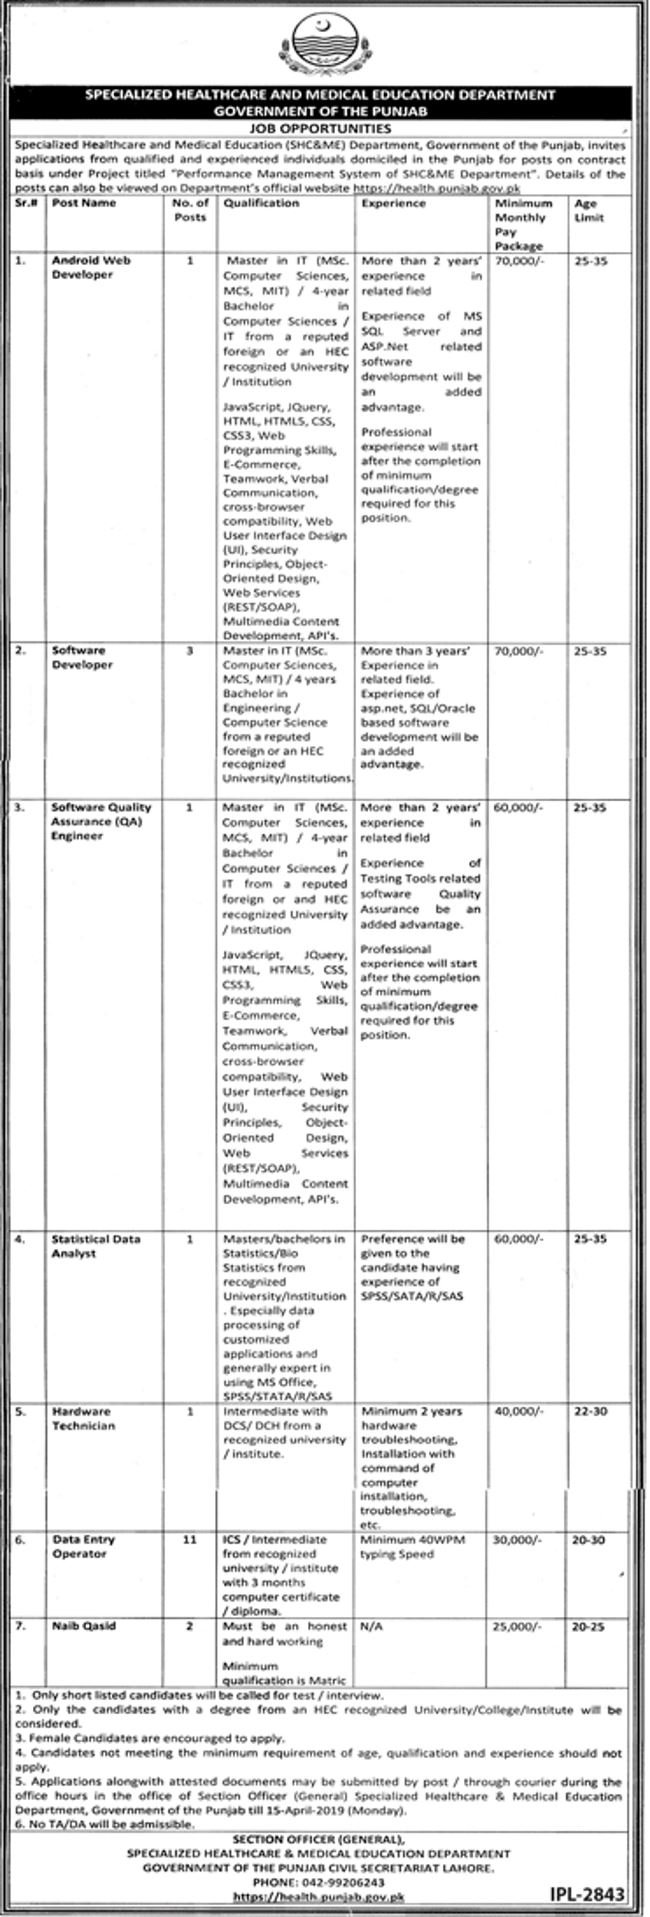 Specialized Healthcare & Medical Education Department Punjab Jobs 2019 for 20+ DEO, IT, Statistics & Support Staff